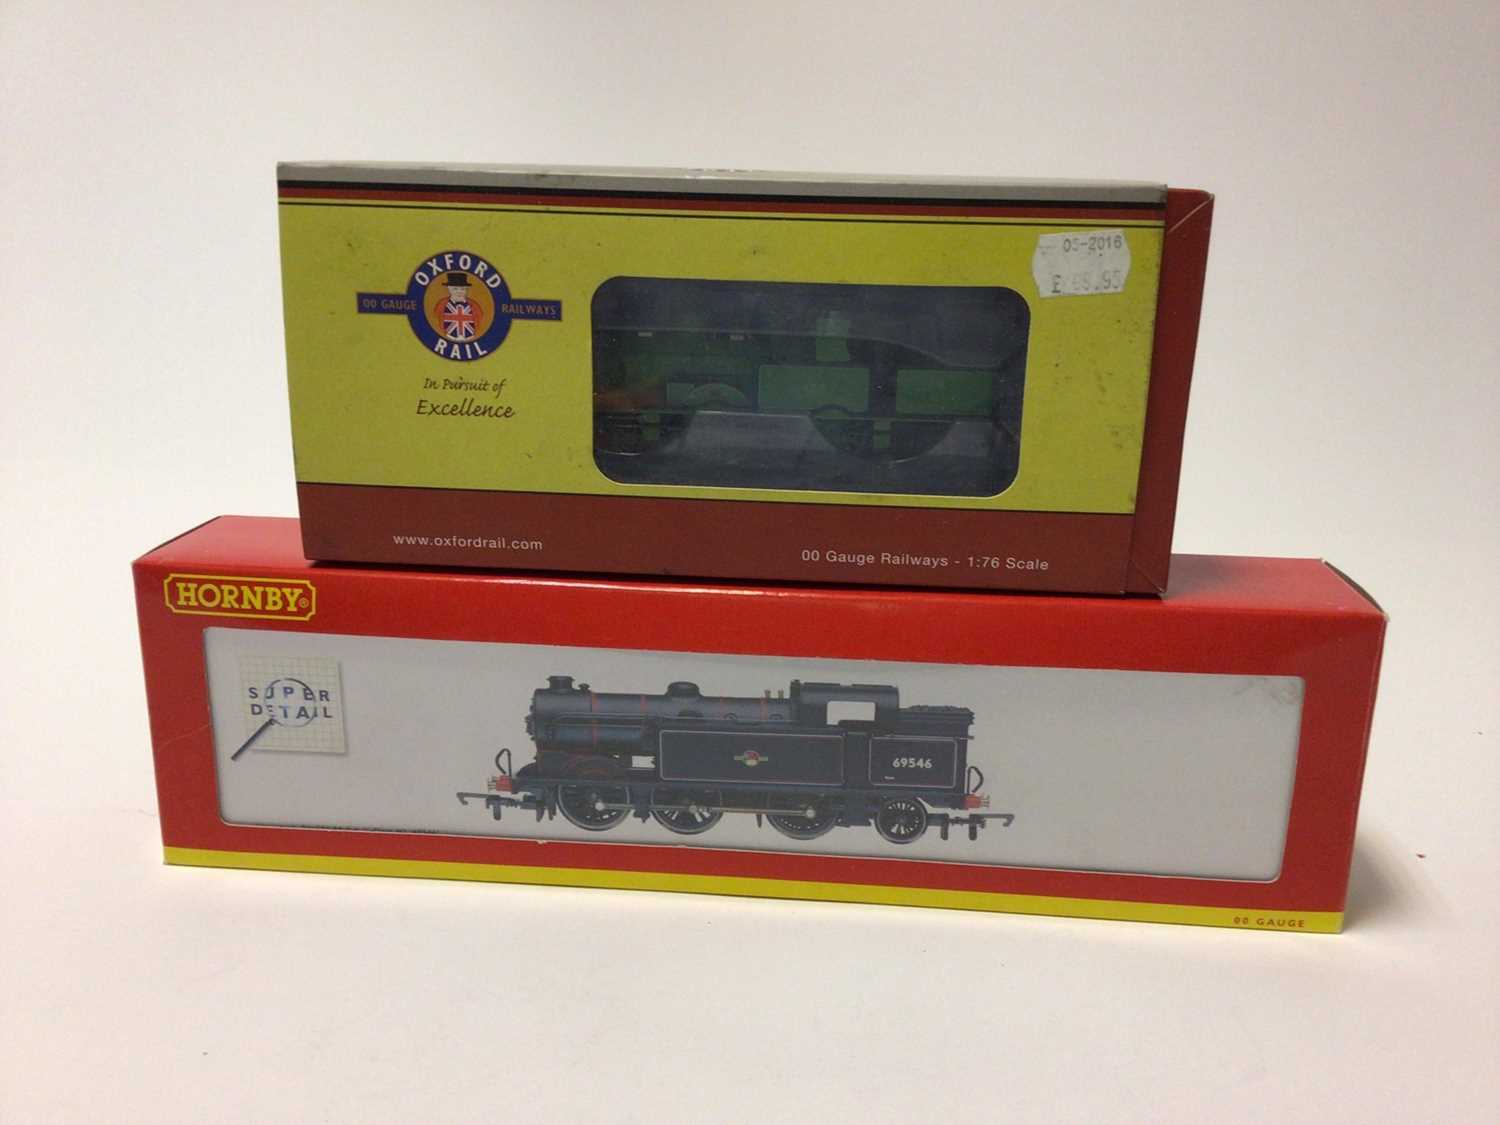 Railway OO Gauge boxed selection including Hornby Class N2 locomotive "69456", R 2178 A Class M7 loc